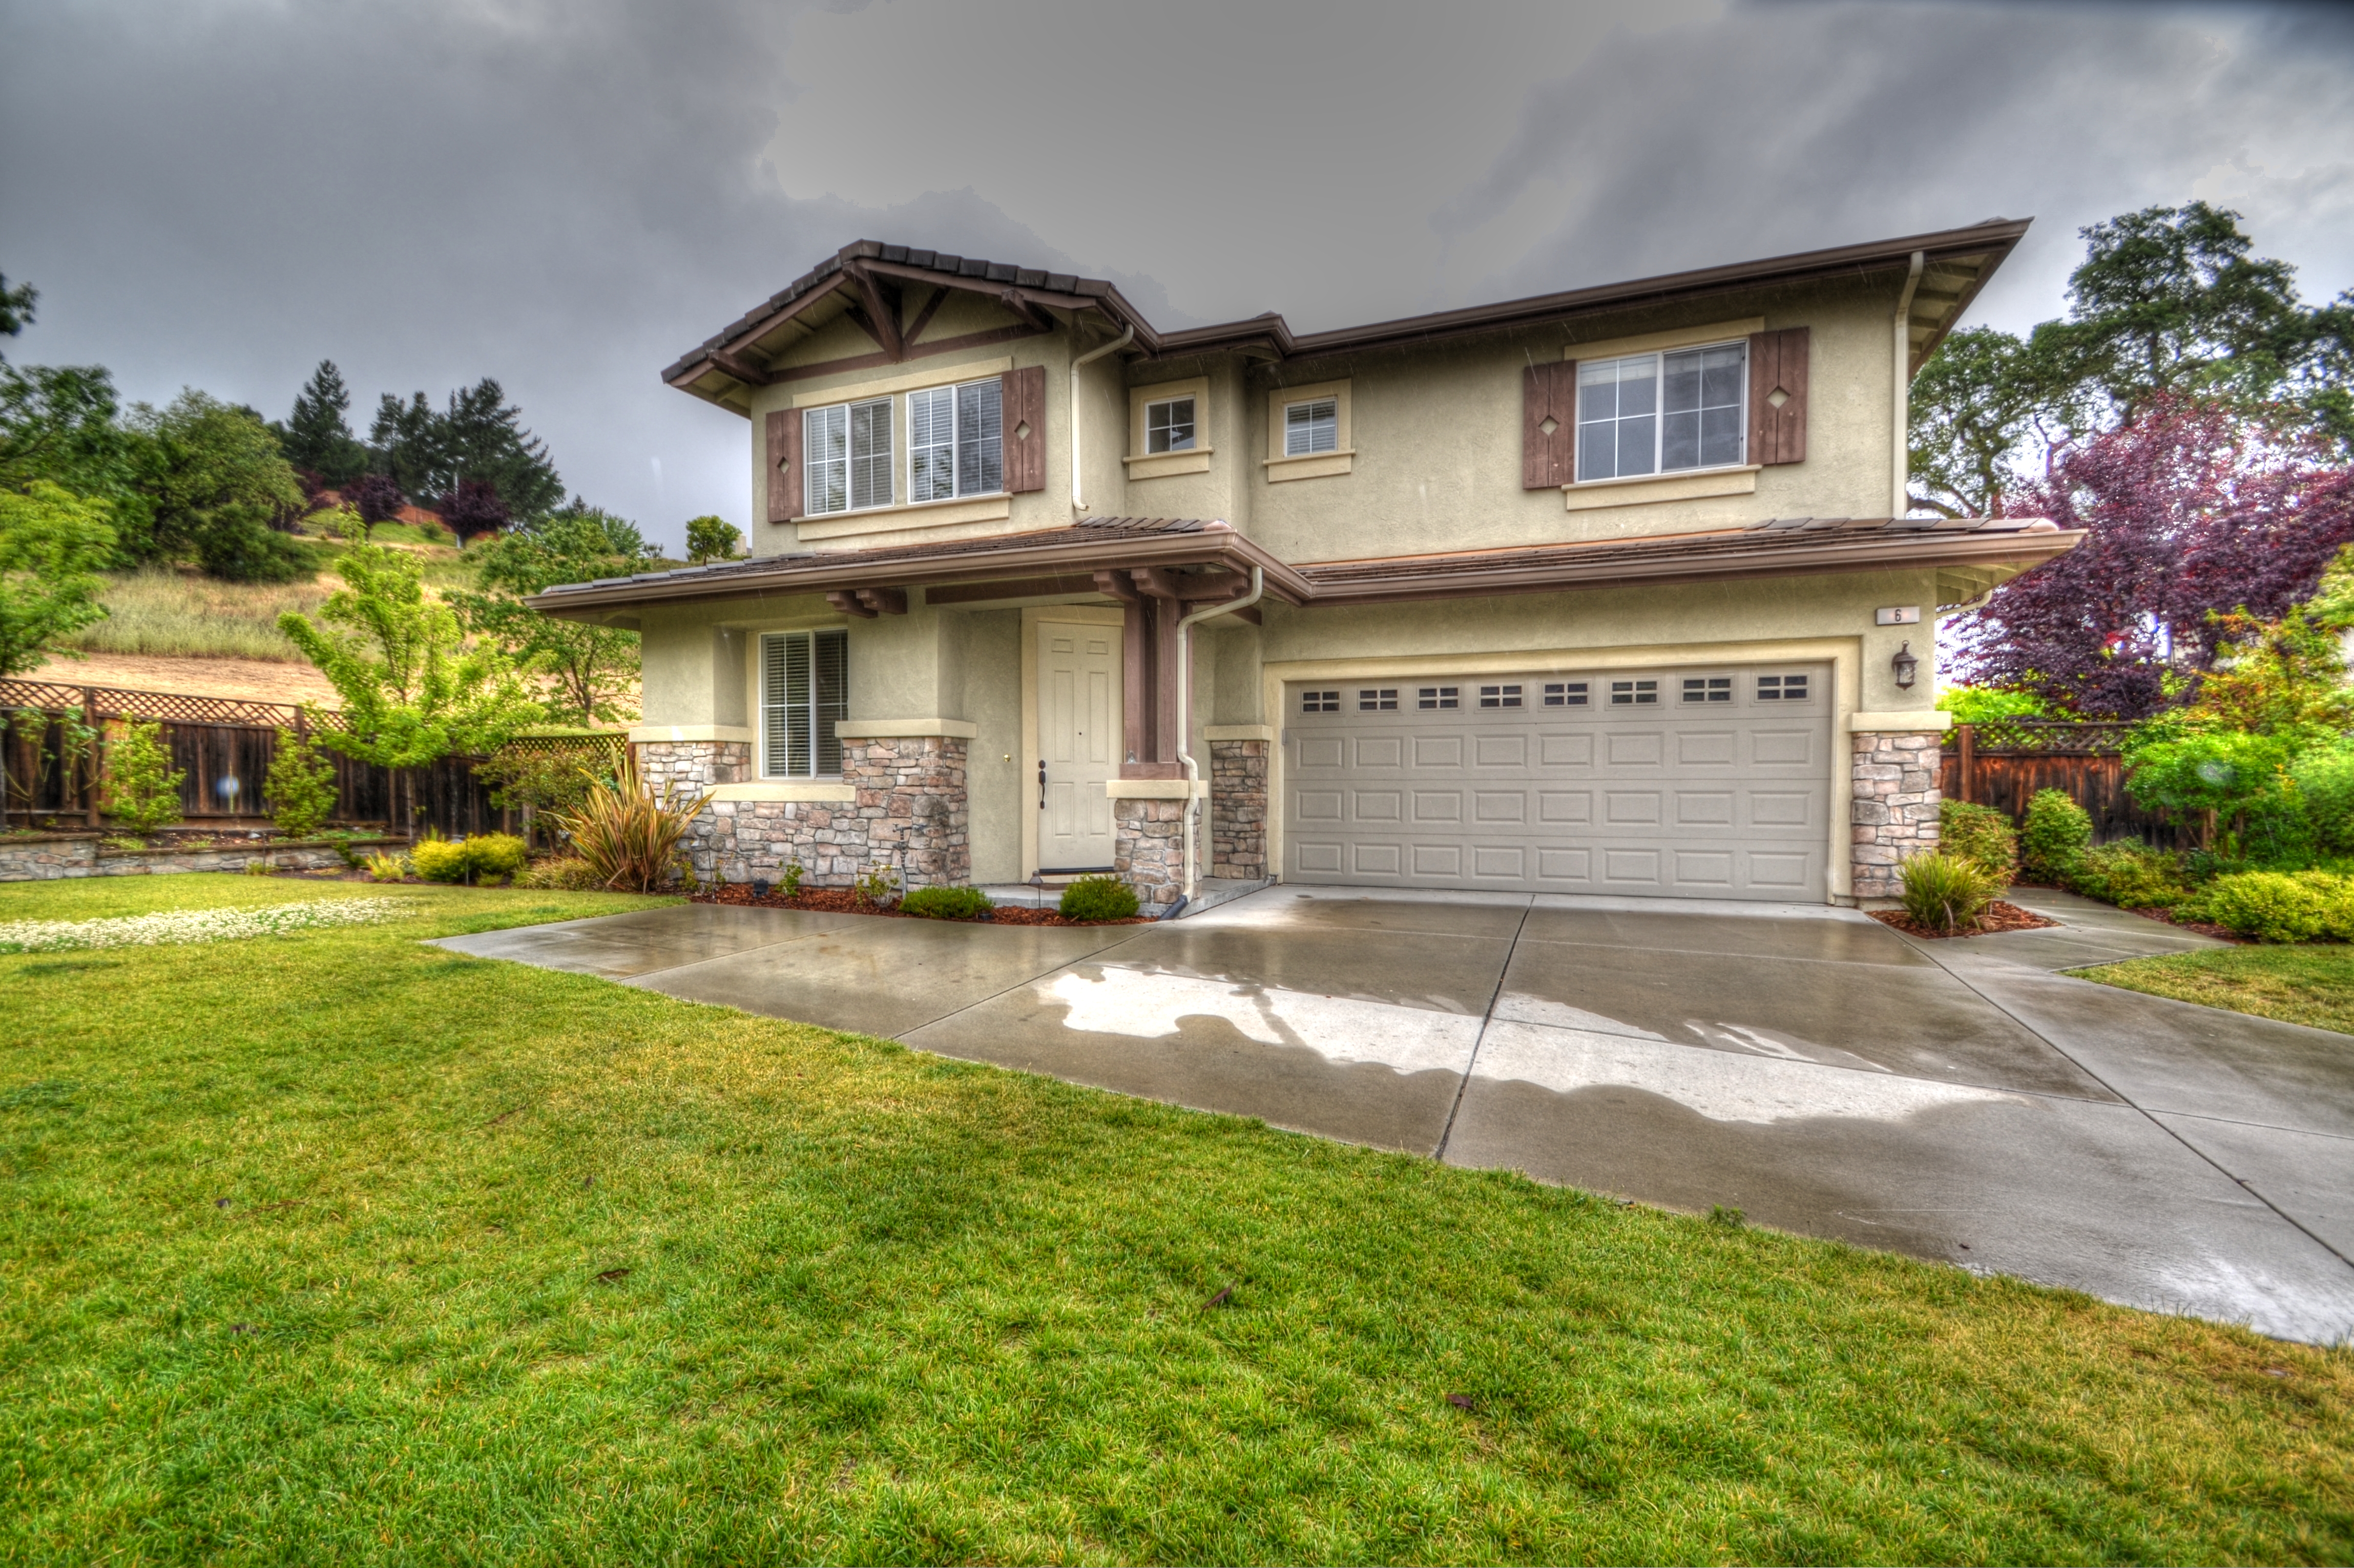 Home for Sale - Henry Ranch - San Ramon | The Harper Team